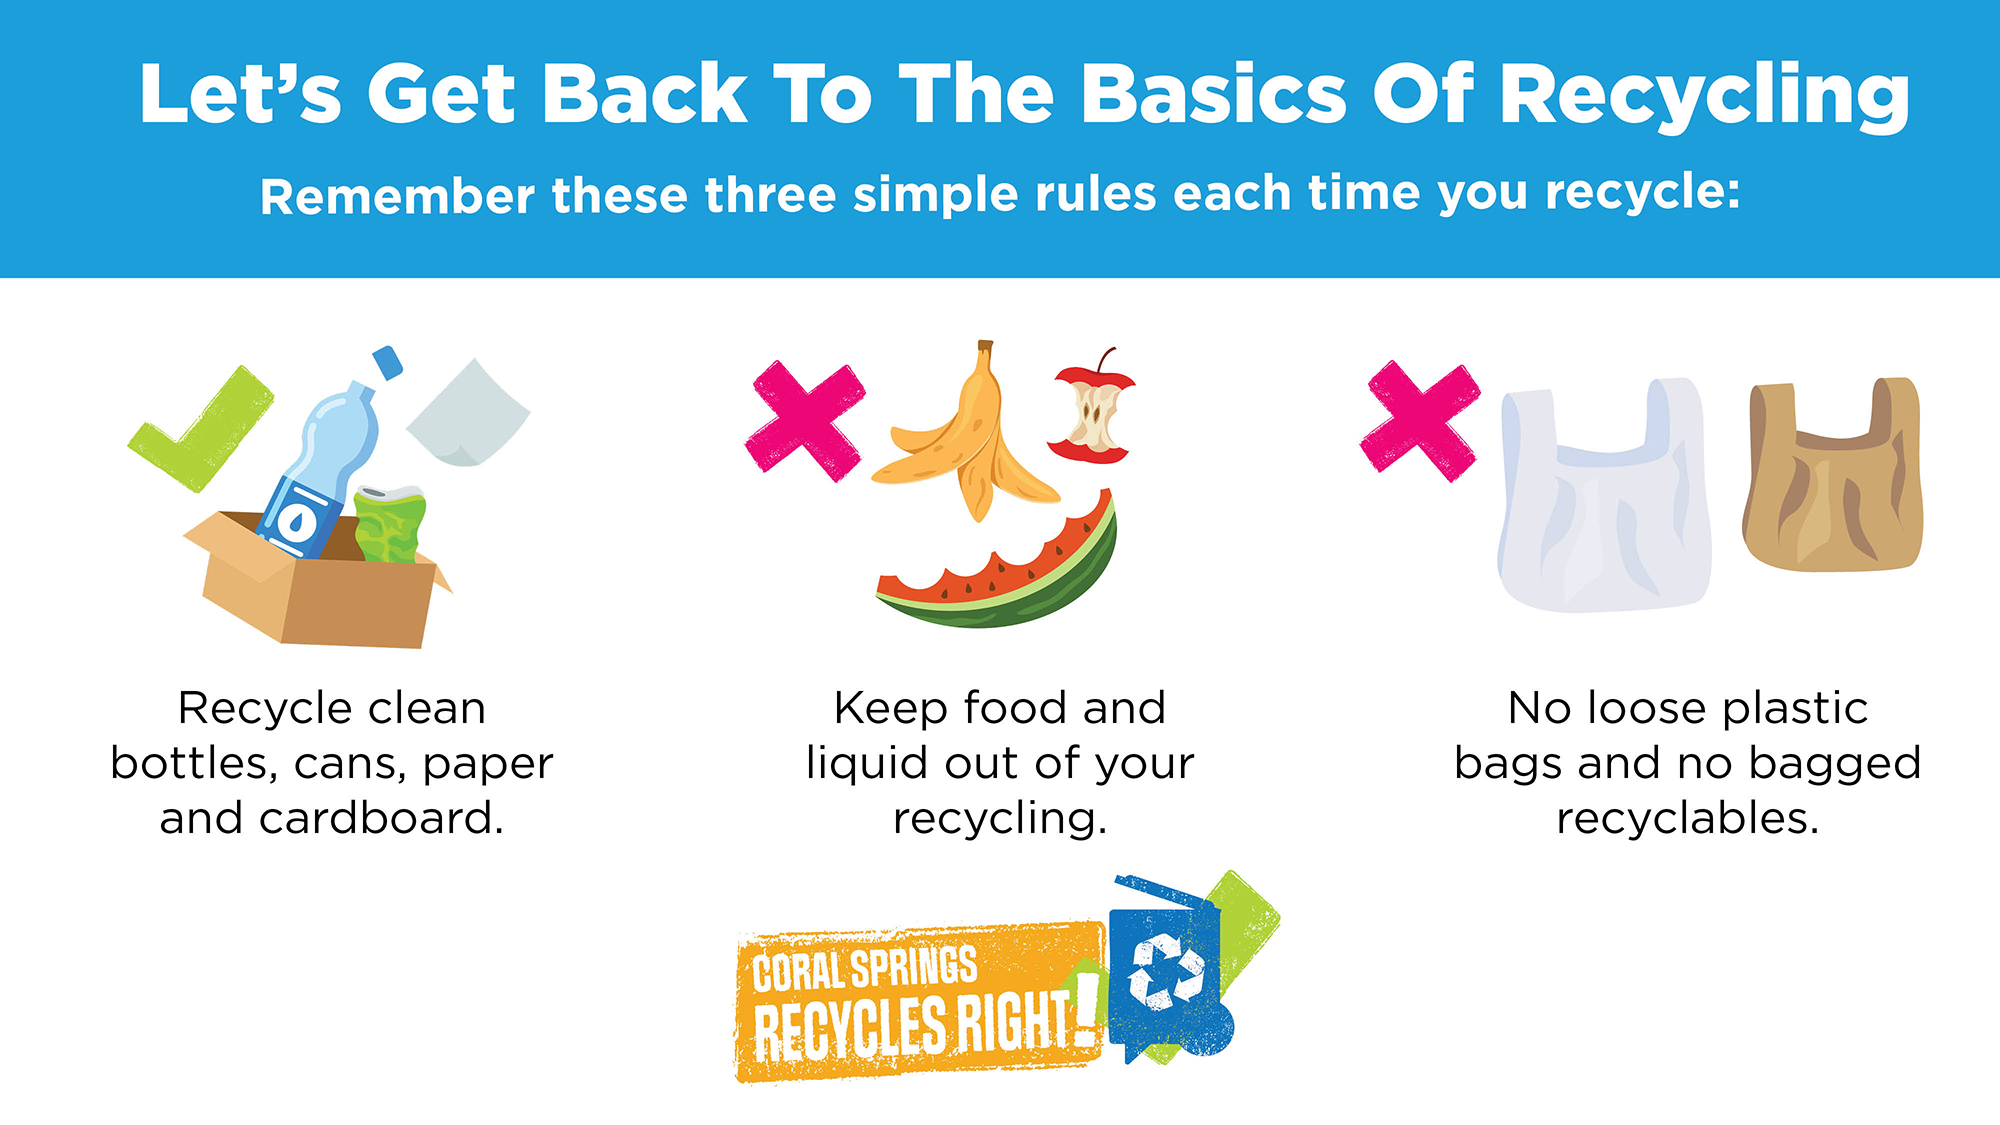 Let's Get Back to the basics of recycling, Recycle Right Campaign